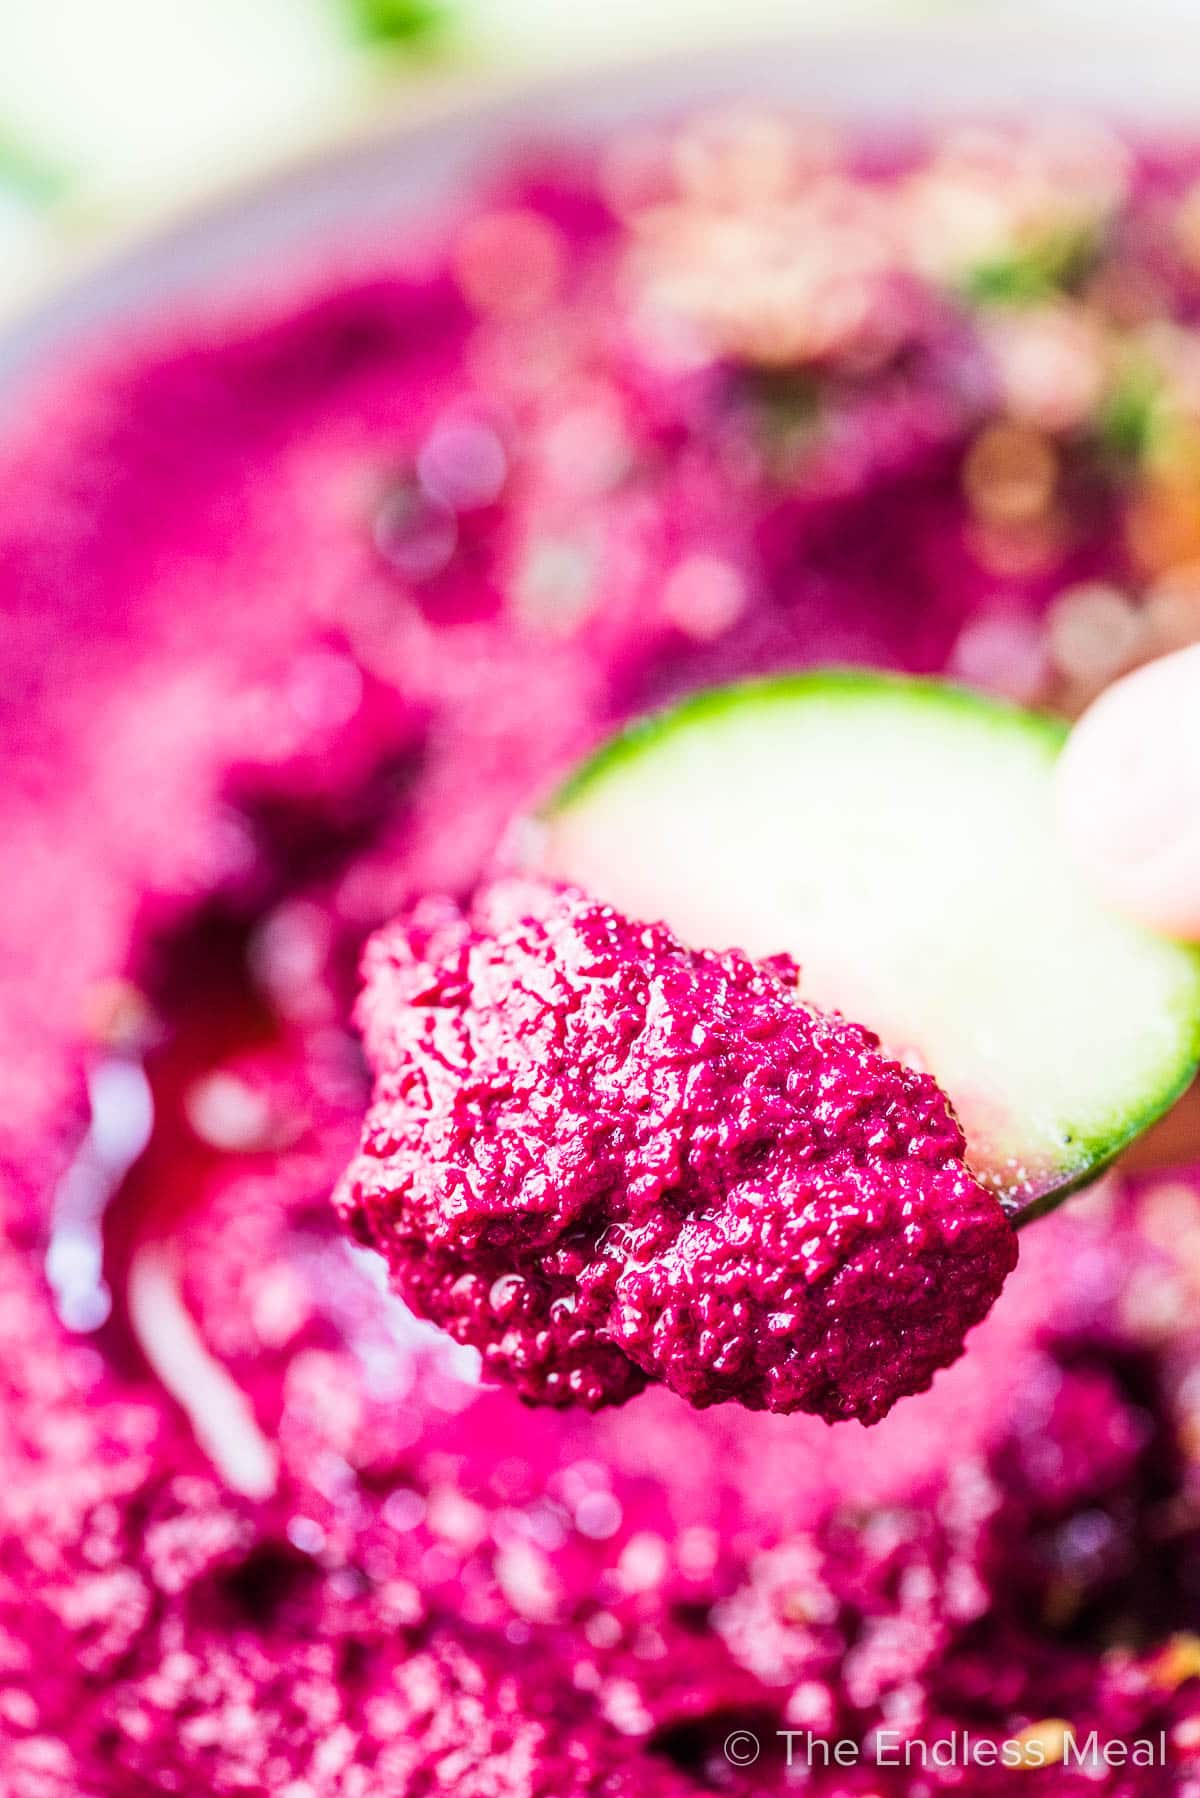 A cucumber slice taking a scoop of this beet hummus recipe.